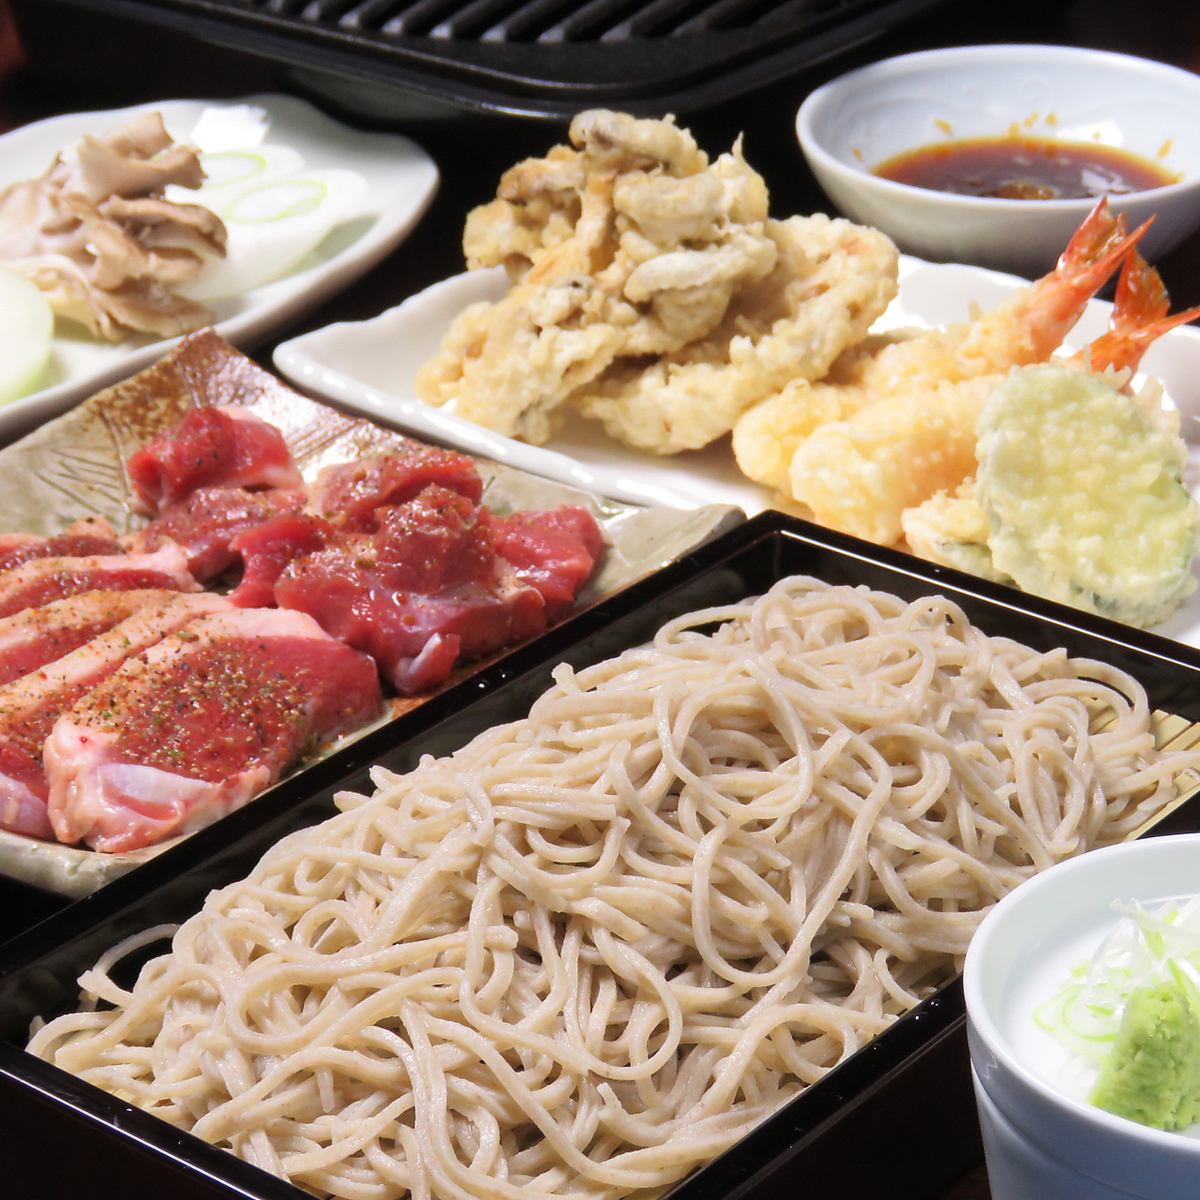 Enjoy the special soba, tempura, and duck dishes